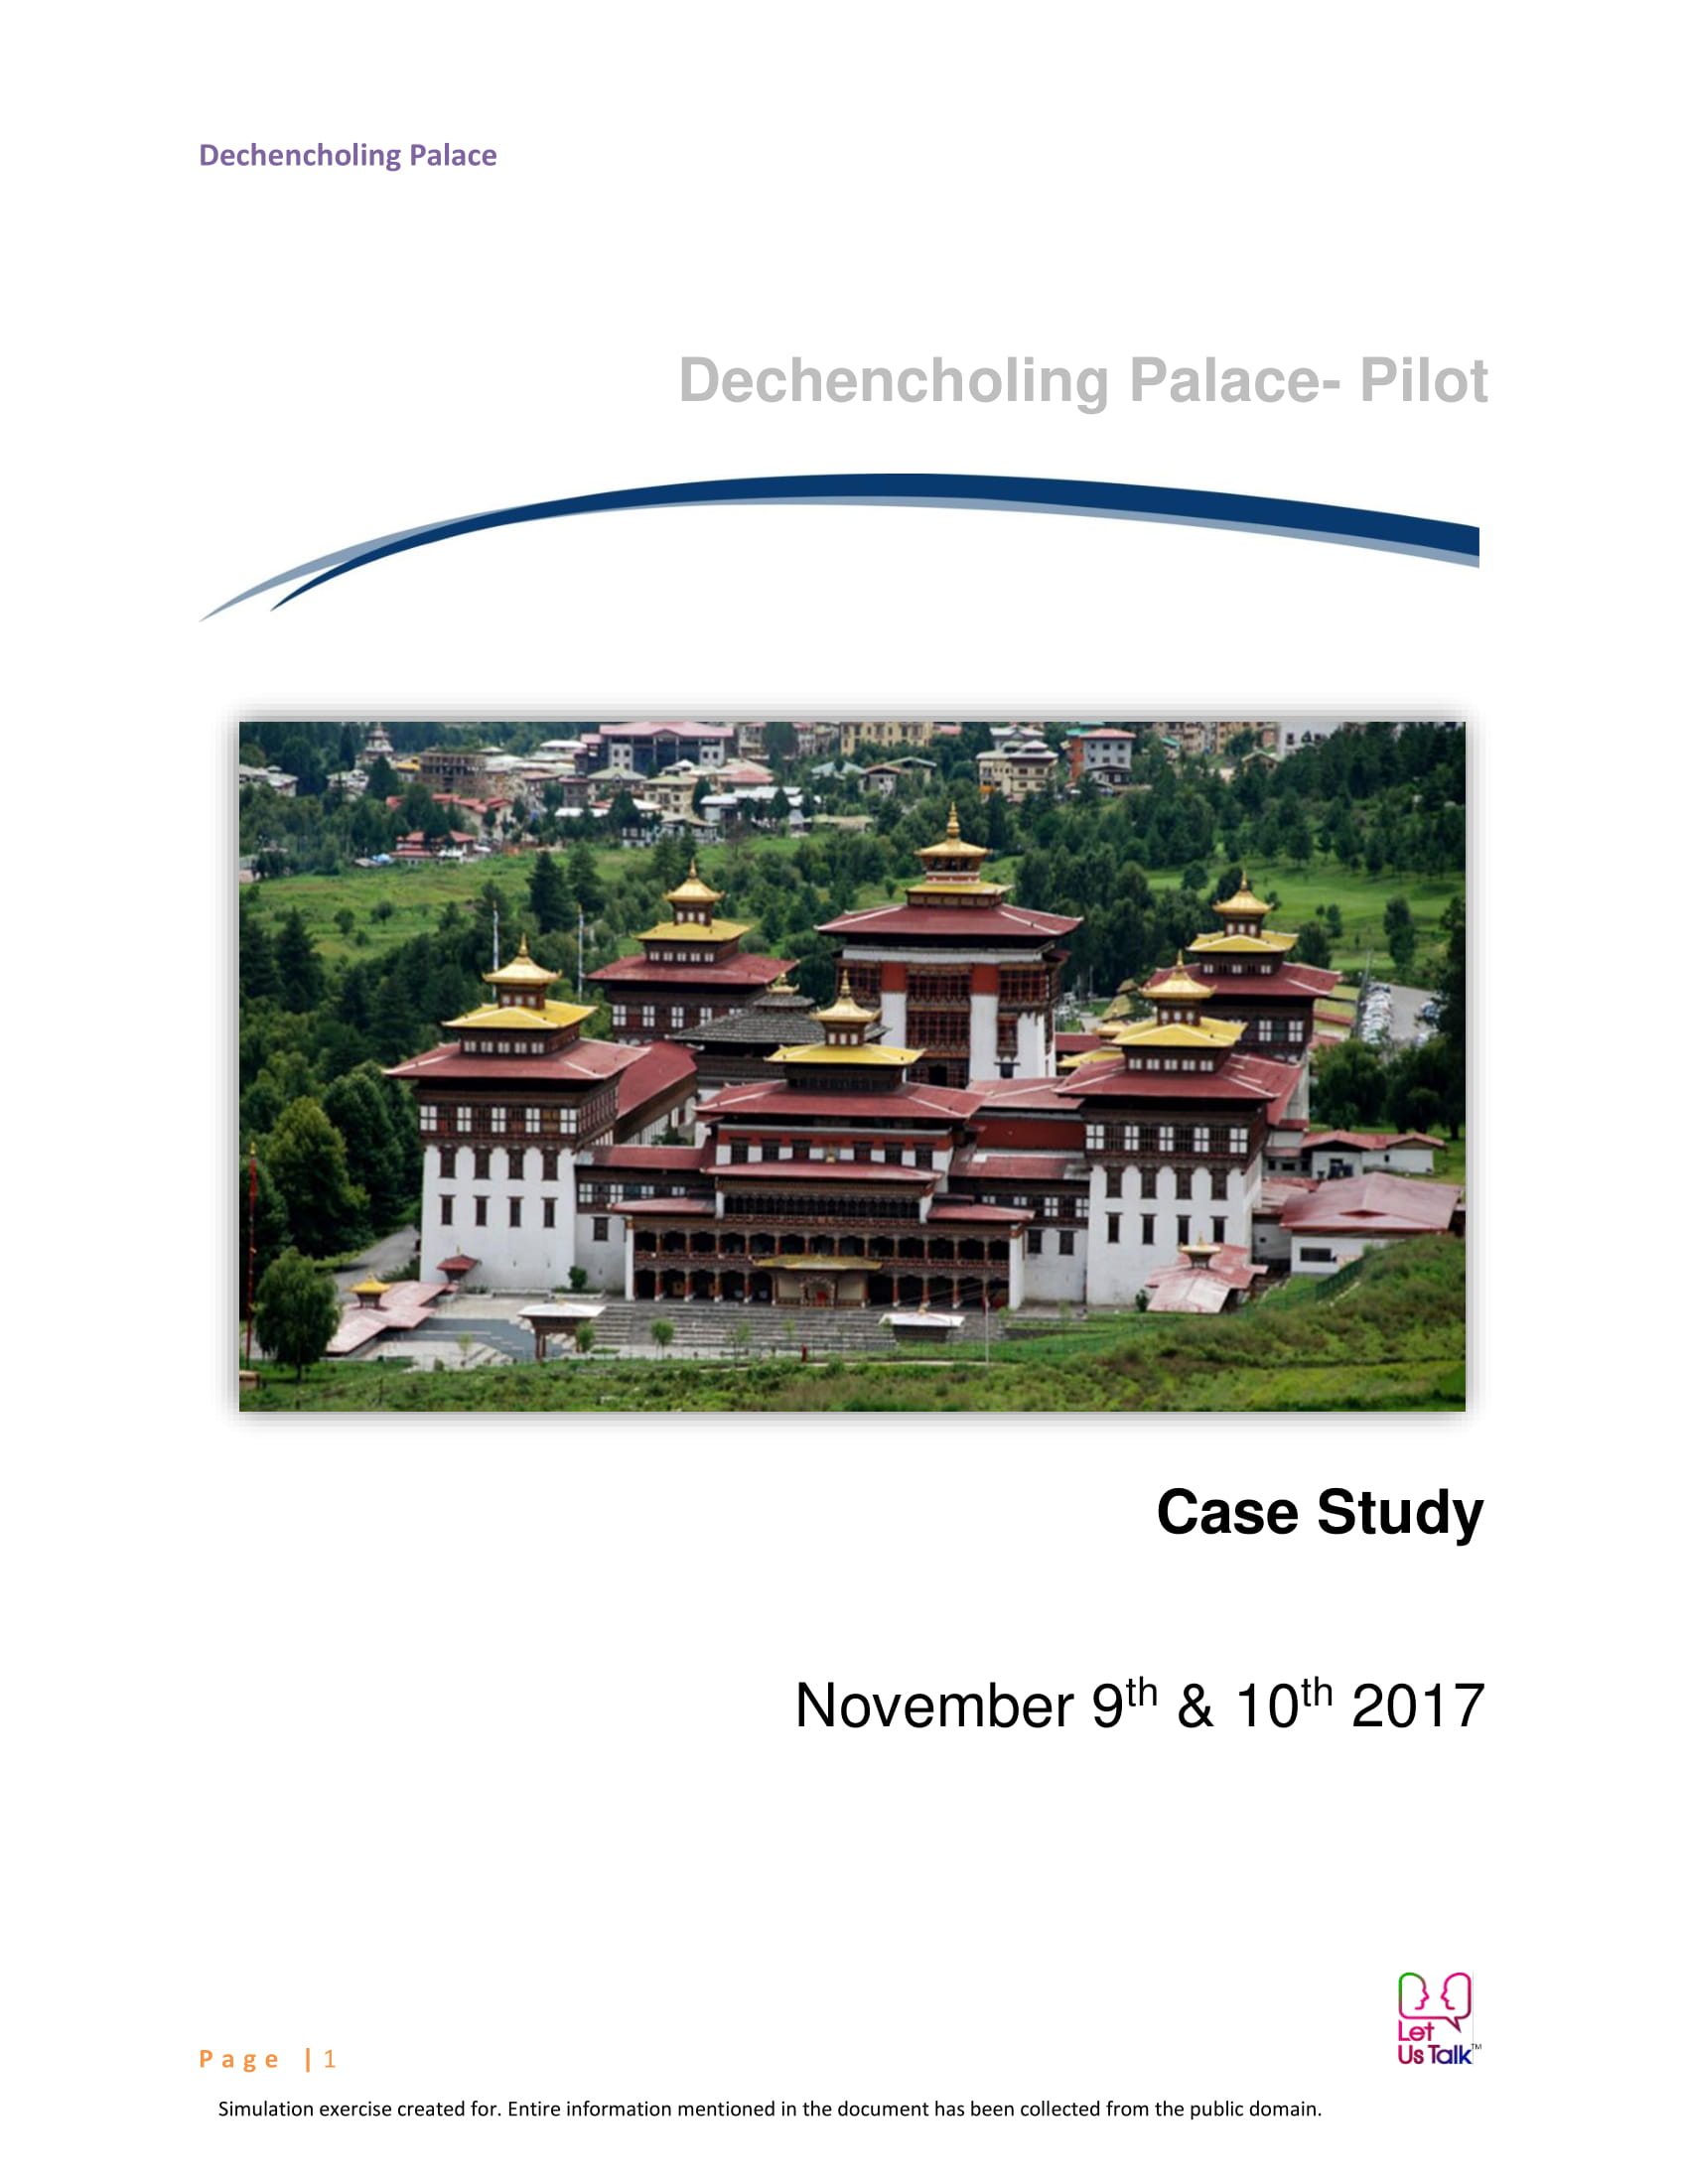 lighting-of-the-dechencholing-palace